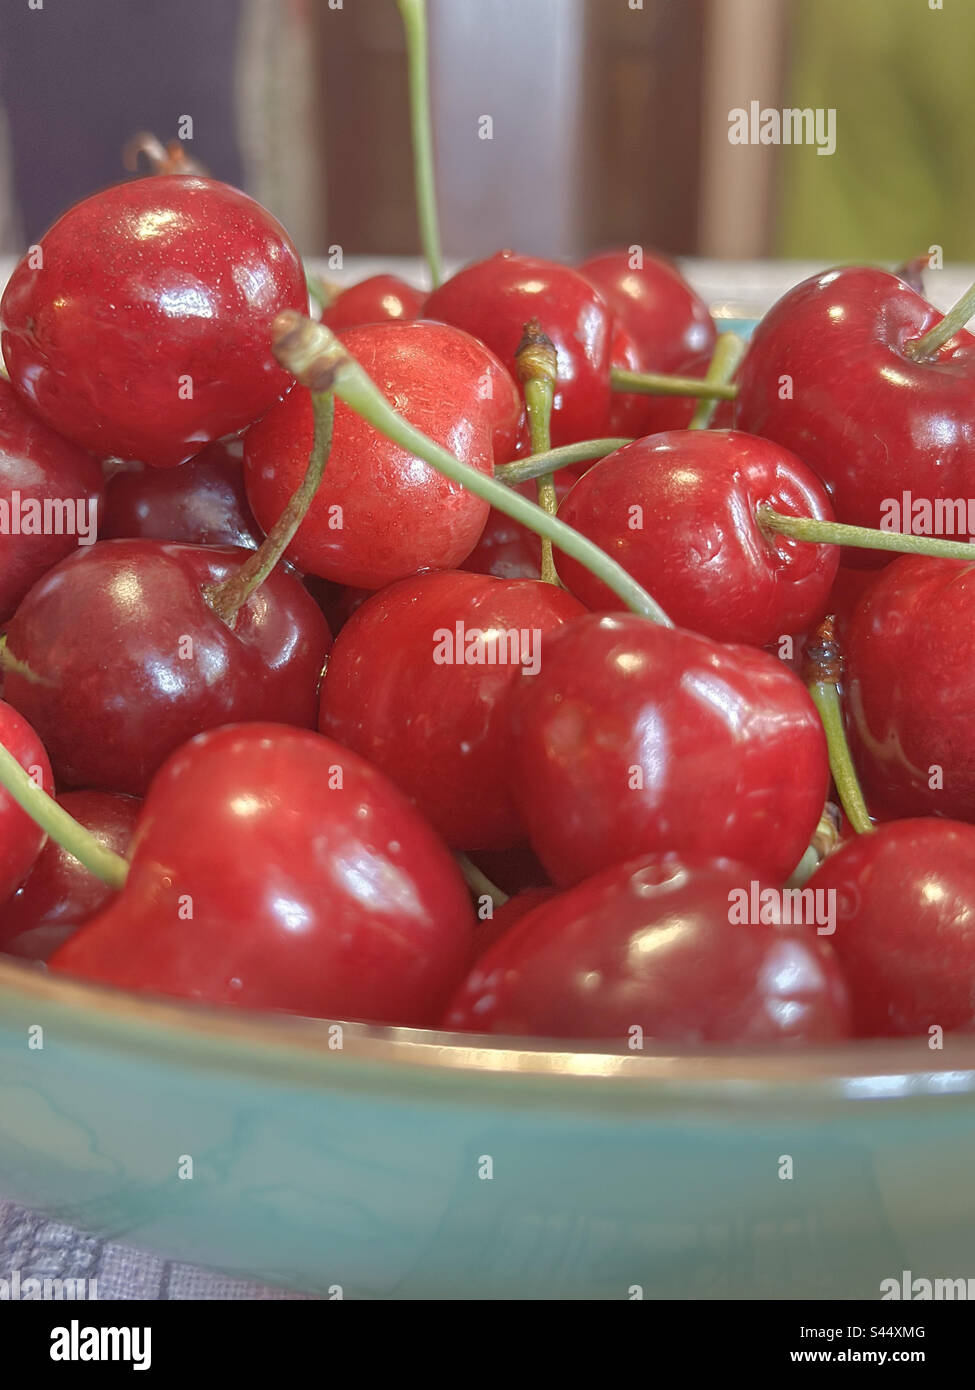 A bowl with a fresh healthy cherries Stock Photo